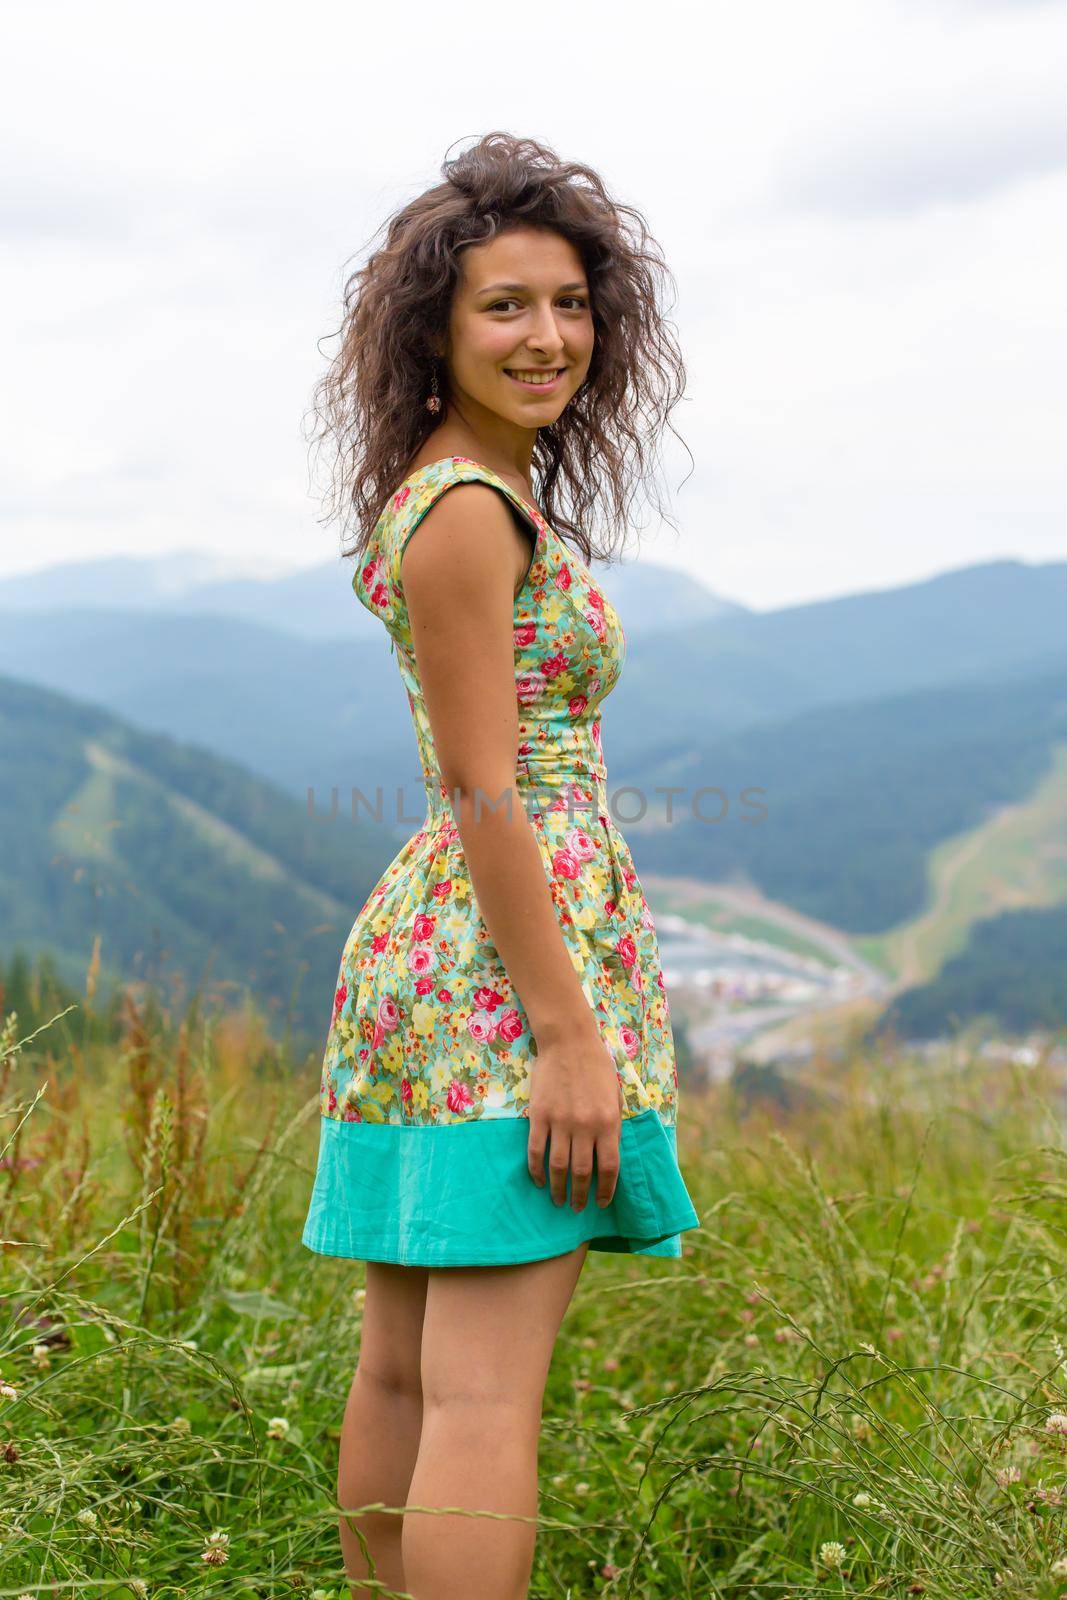 Happy gorgeous girl enjoy mountain view stay in summer dress on the hill with breathtaking mountain landscape.